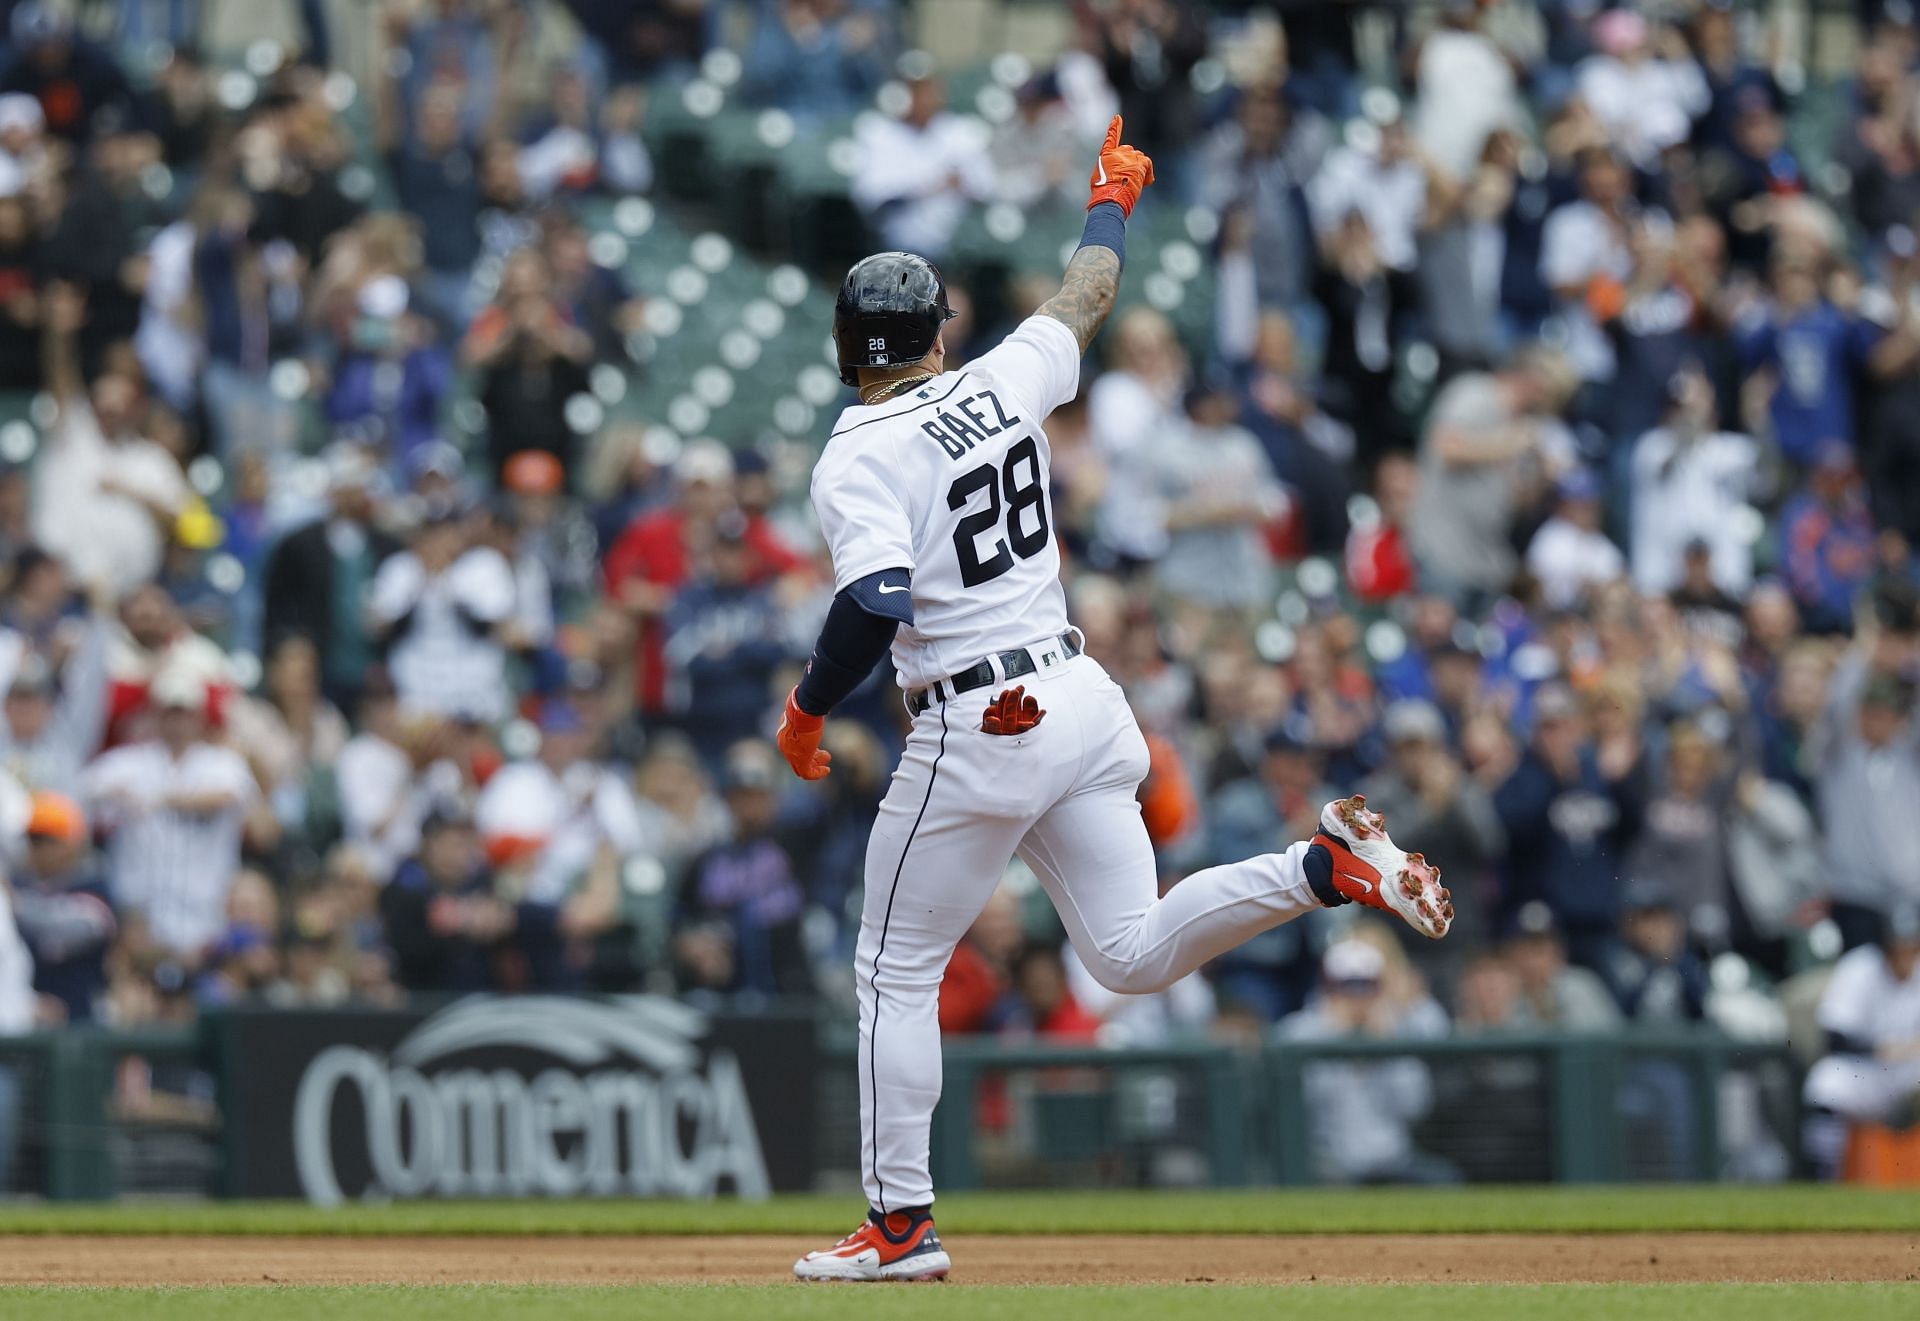 Message delivered: Báez benched by Hinch, Tigers go on to snap 6